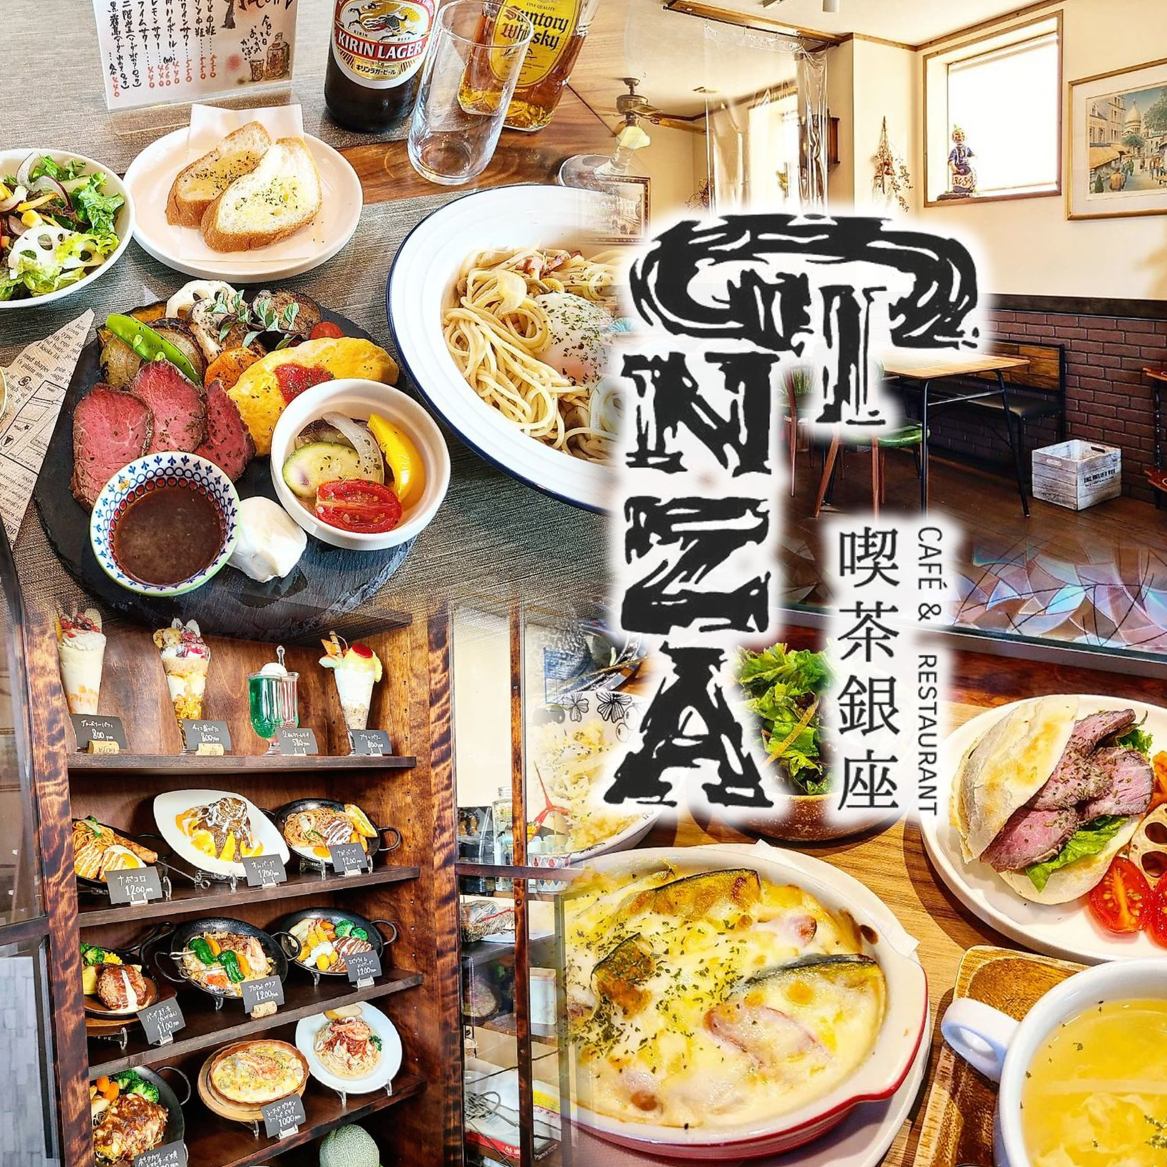 Founded in 1968 ◇ Taste that hasn't changed since long ago ♪ Western-style restaurant "Coffee GINZA" loved by local customers